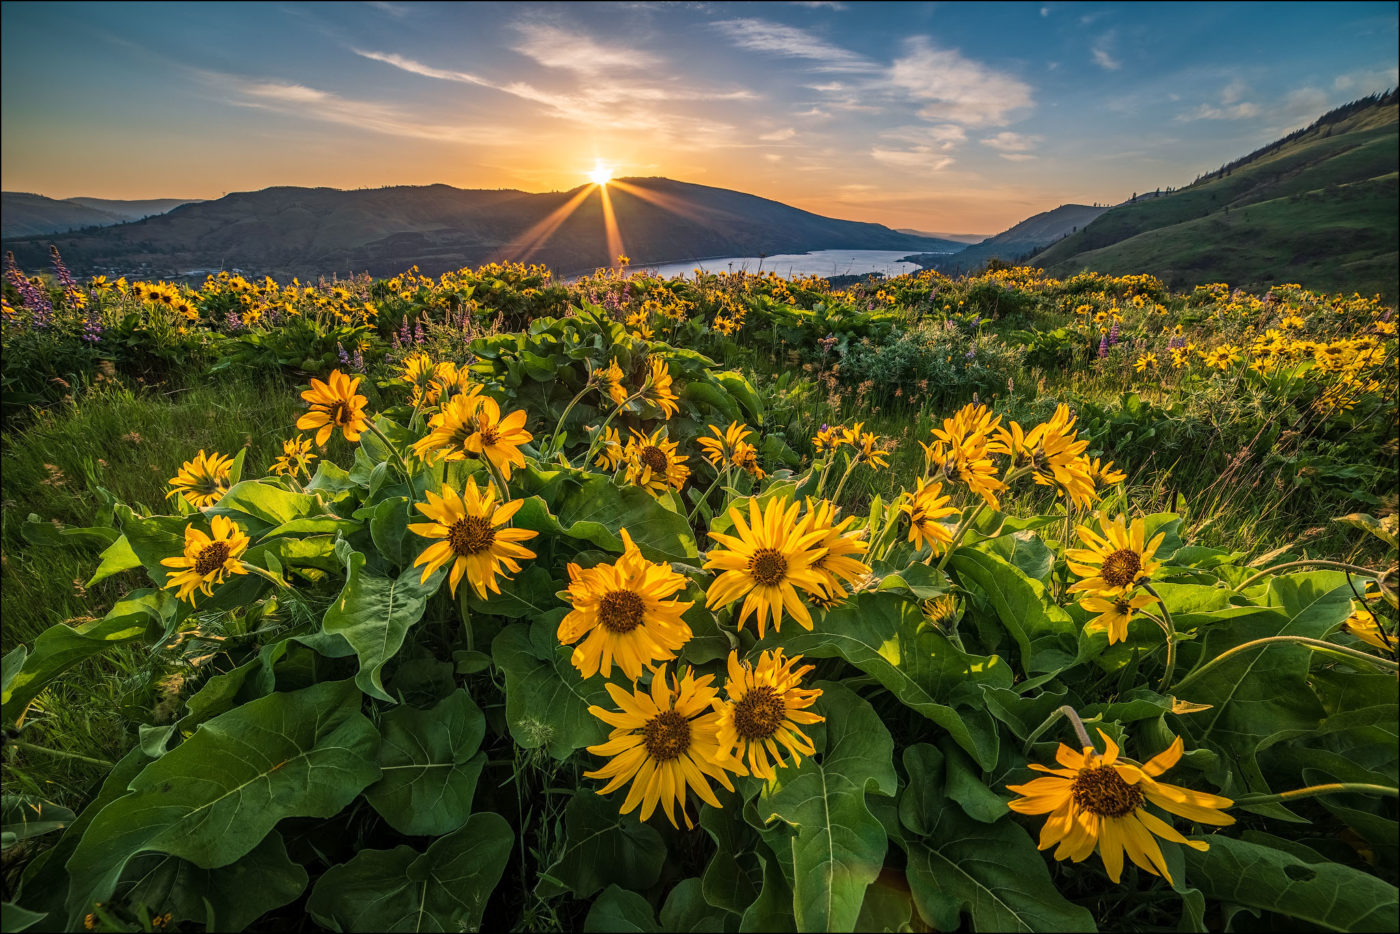 balsamroot wildflowers at Rowena Crest overlooking the Columbia River Gorge in Oregon.